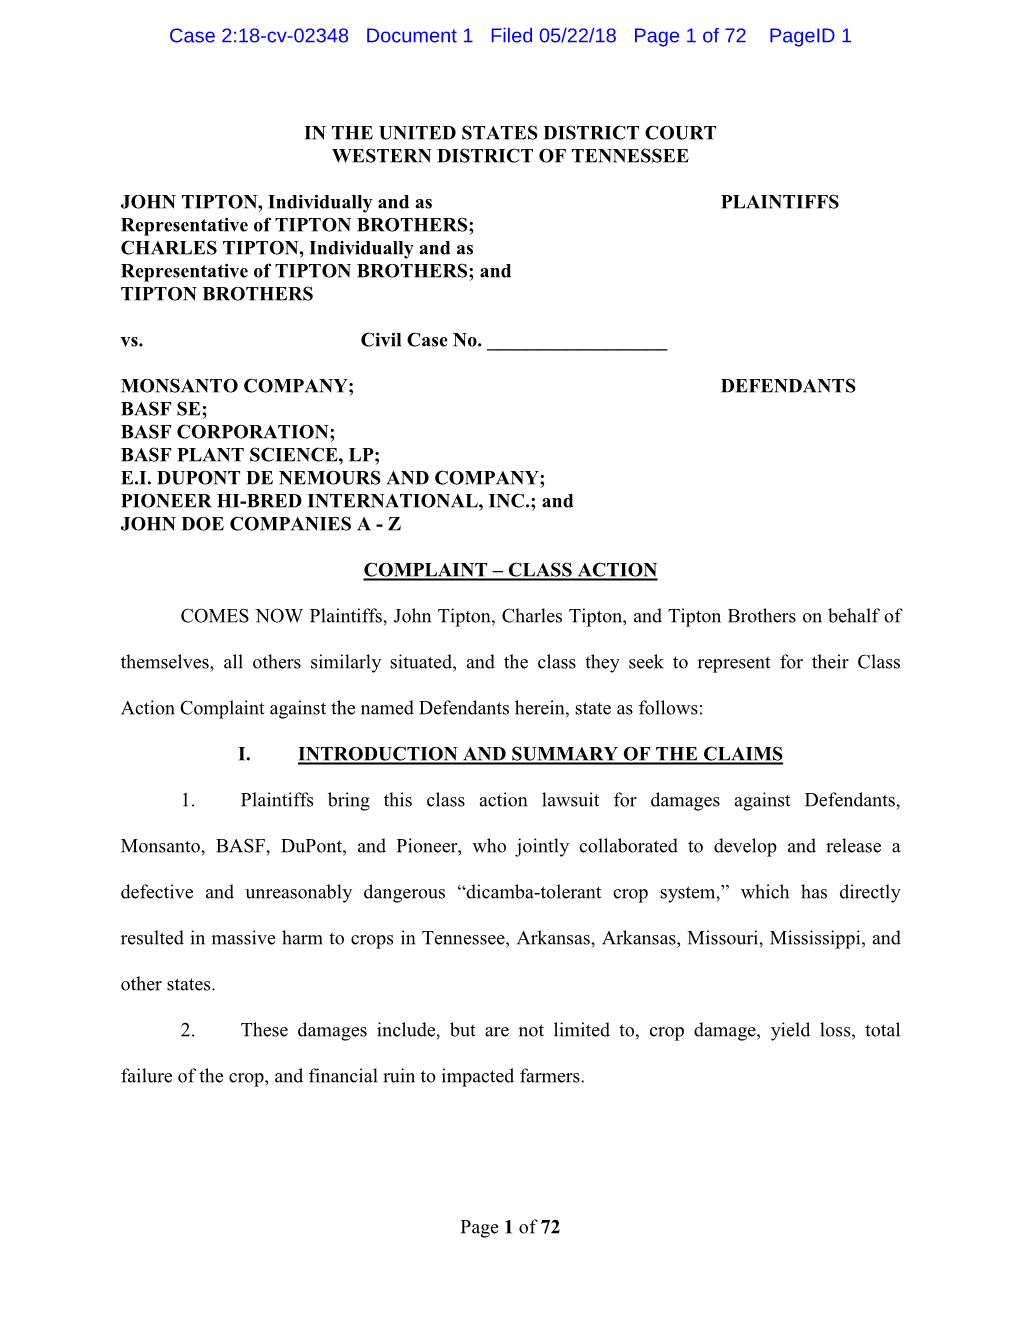 Page 1 of 72 in the UNITED STATES DISTRICT COURT WESTERN